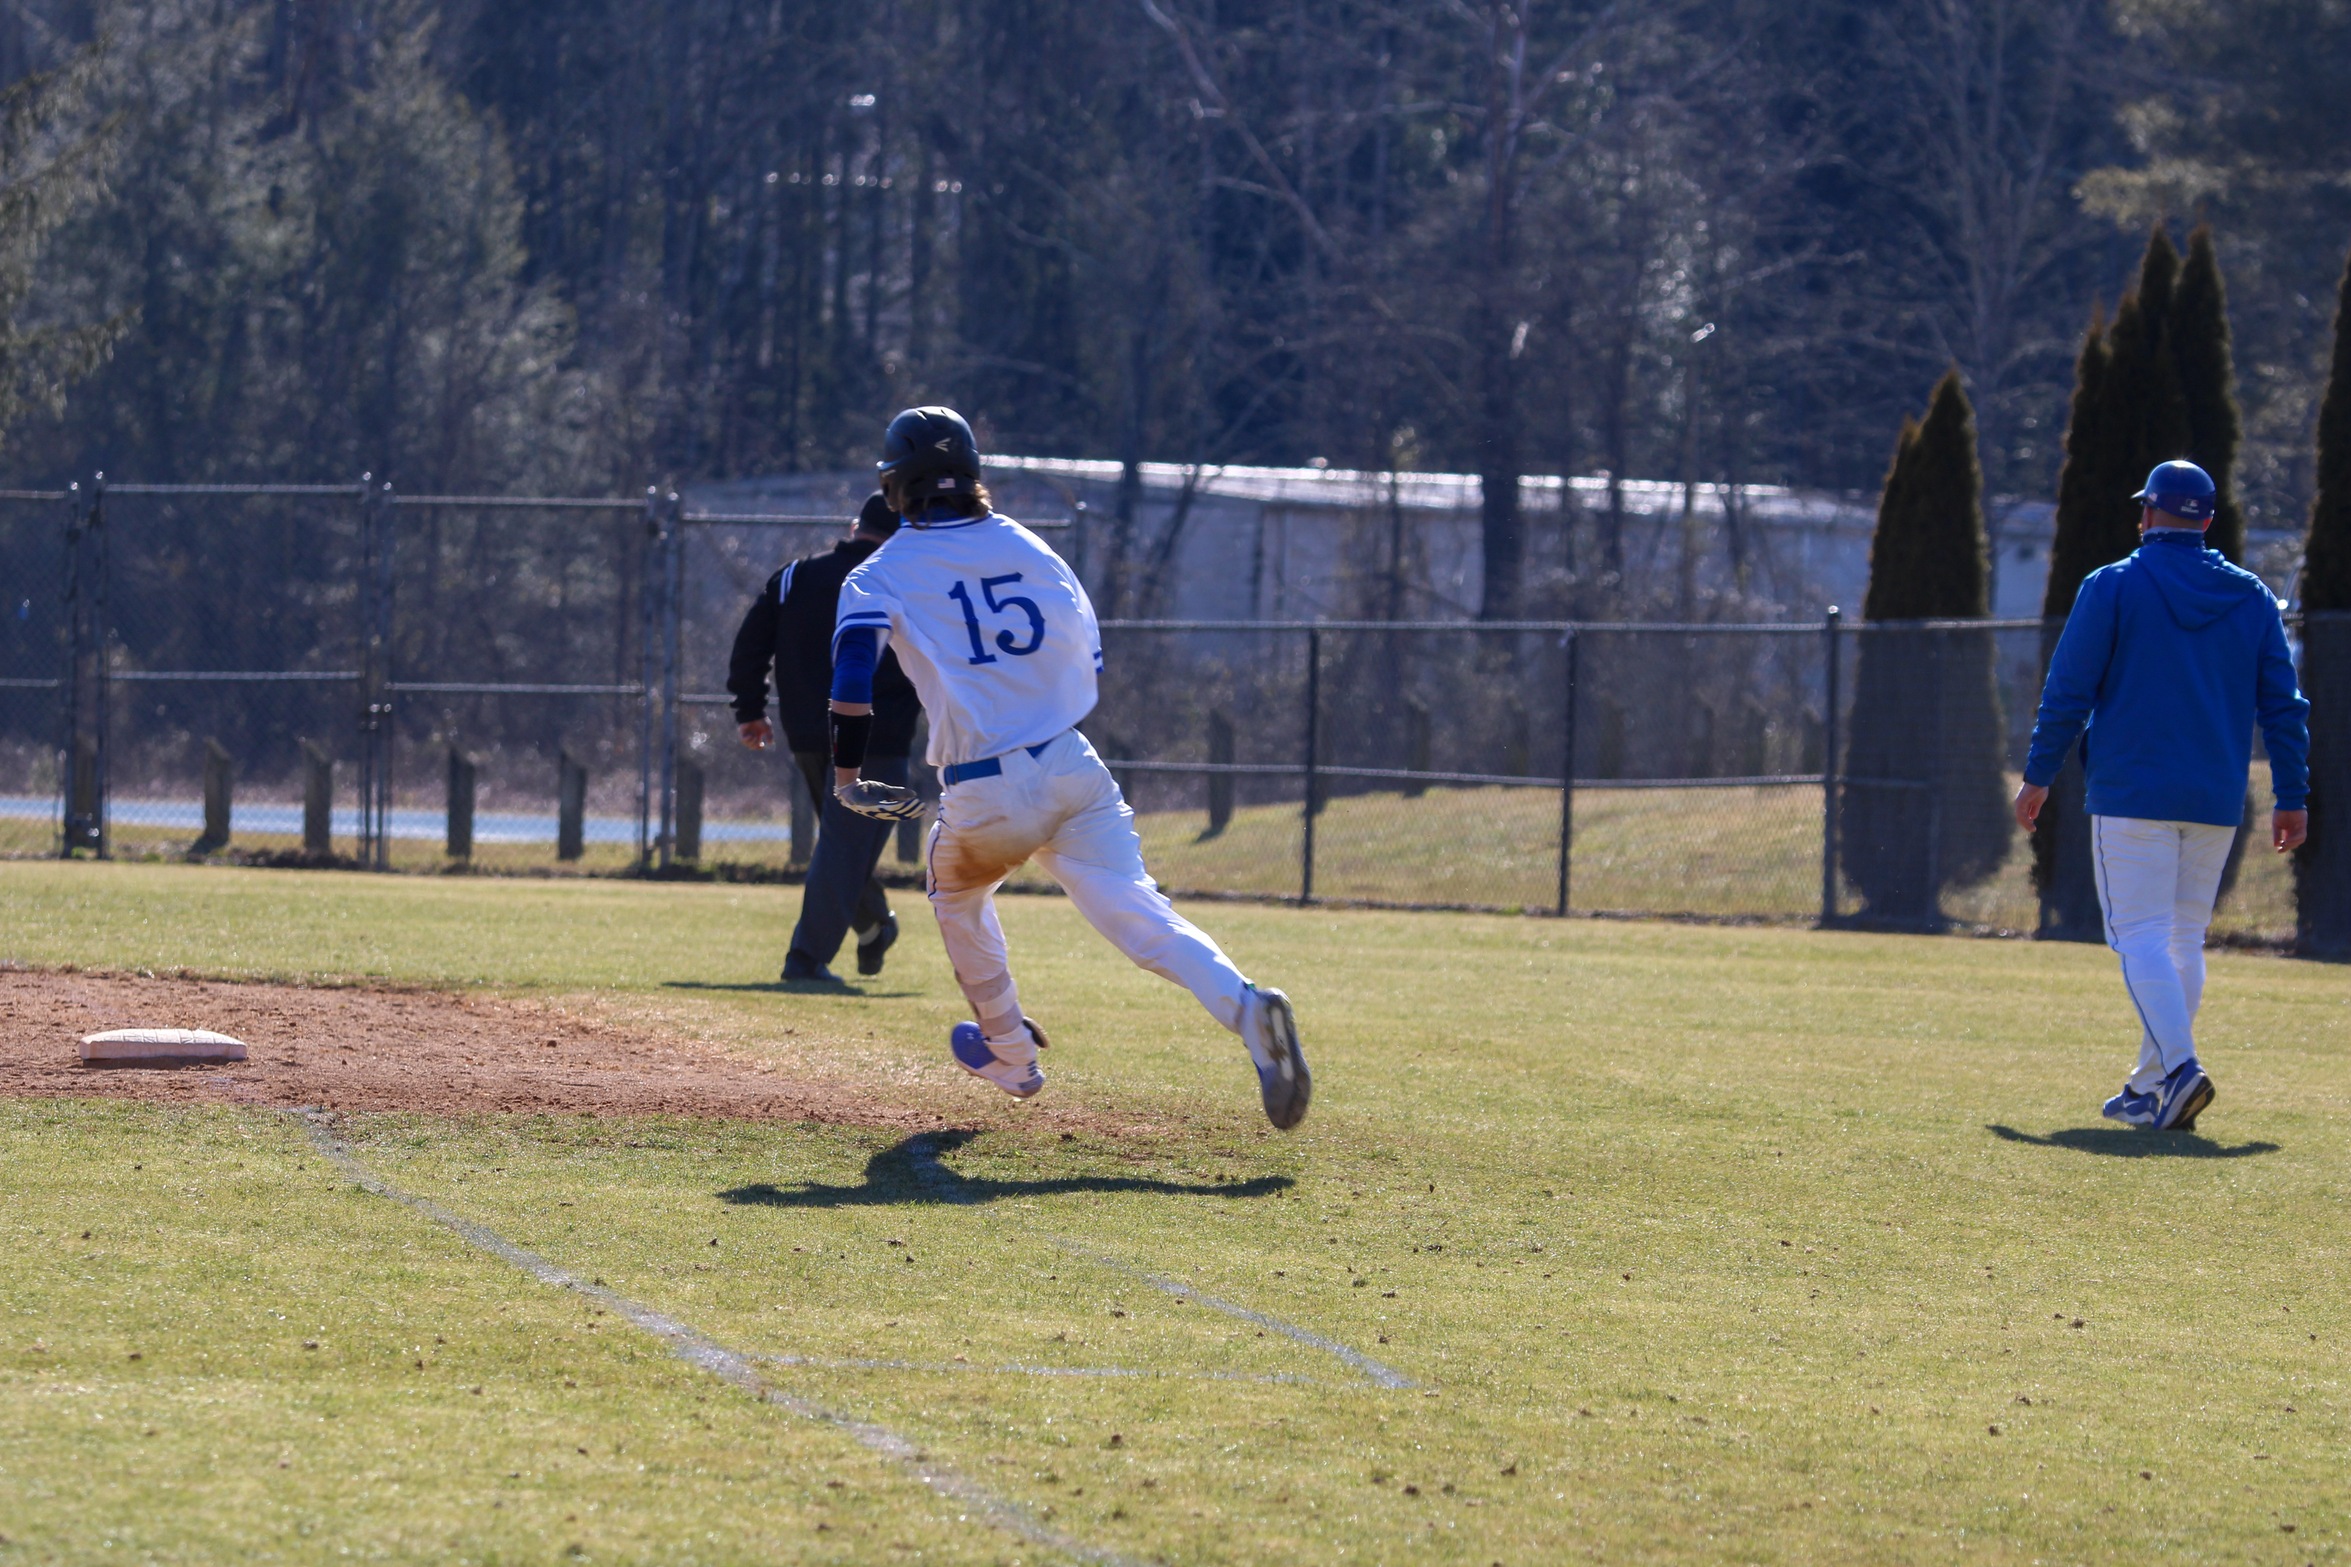 Freshman outfielder Logan Clark drilled an opposite-field, two-RBI triple that helped the Tornados to an emphatic come-from-behind victory in their doubleheader sweep over William Peace (Photo courtesy of Brianna Rodibaugh '24).